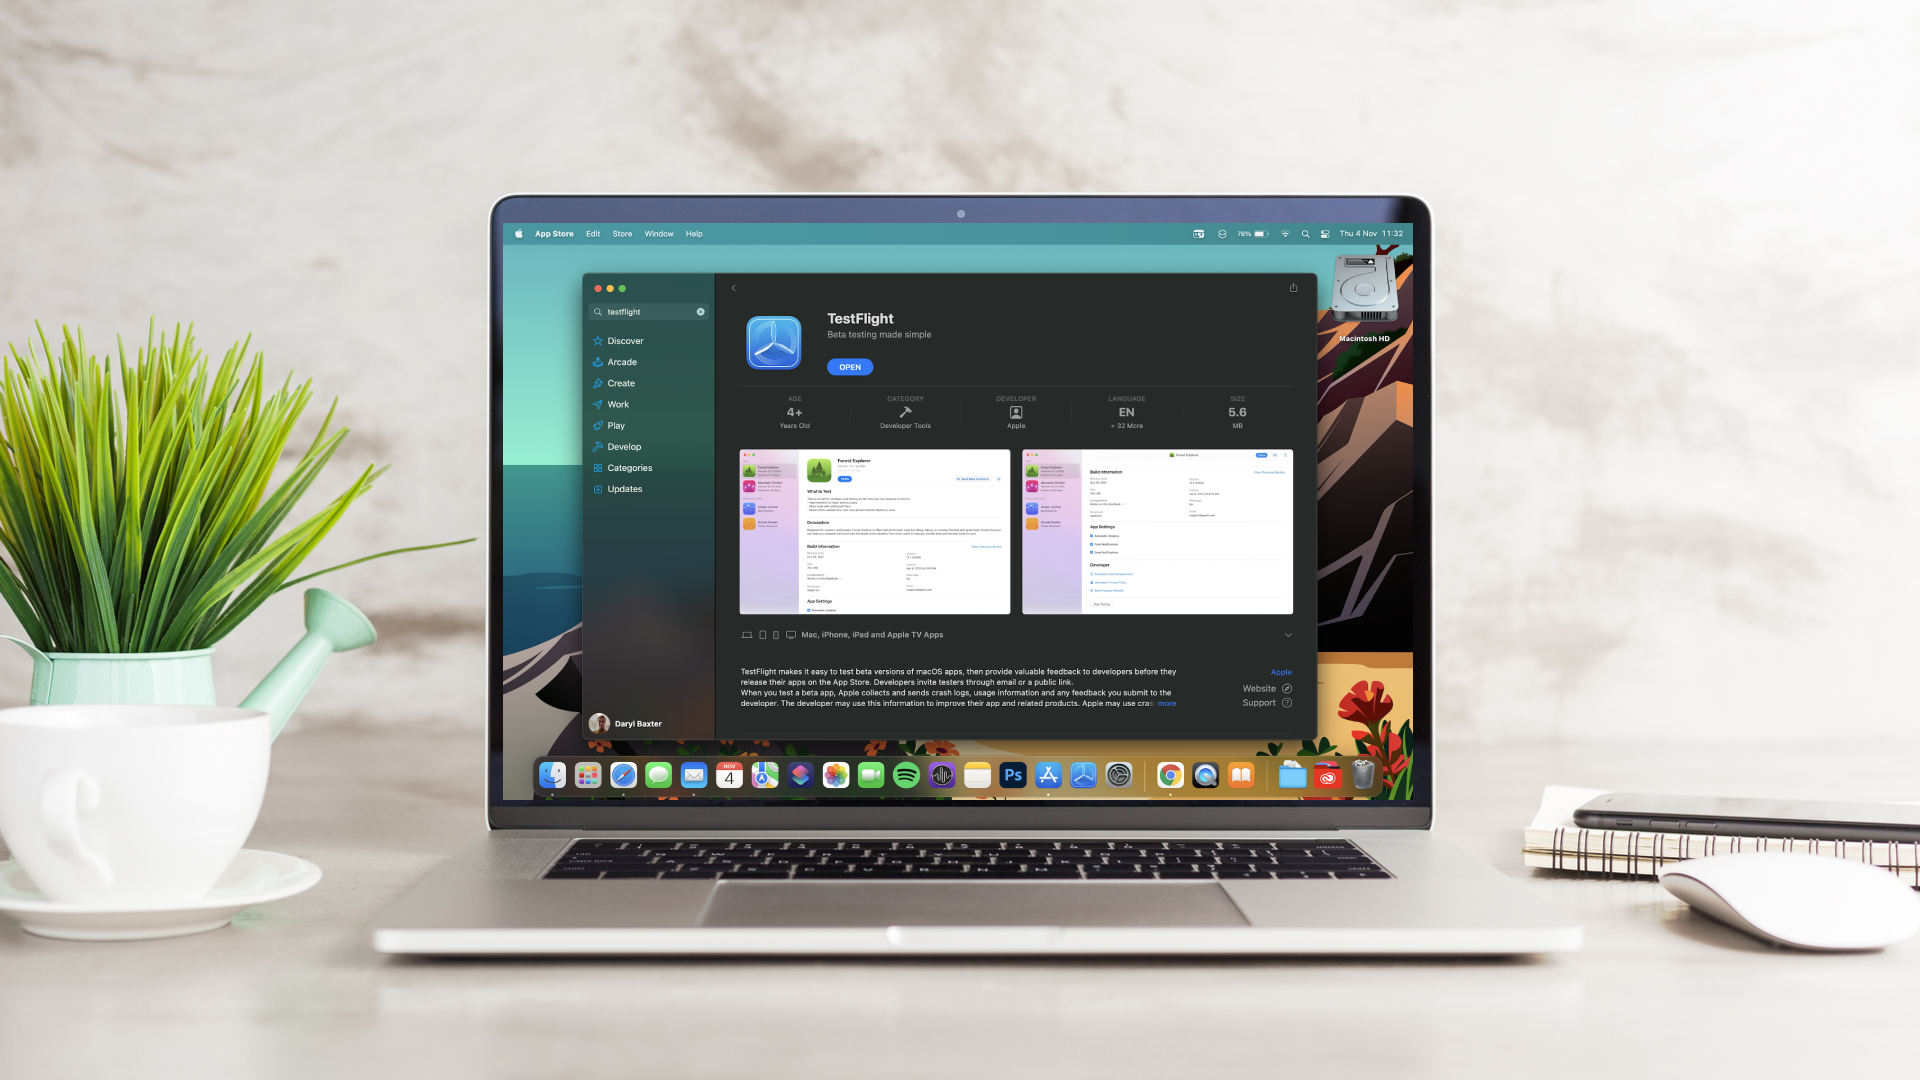 Apple releases macOS Monterey beta update, but we’re waiting for WWDC